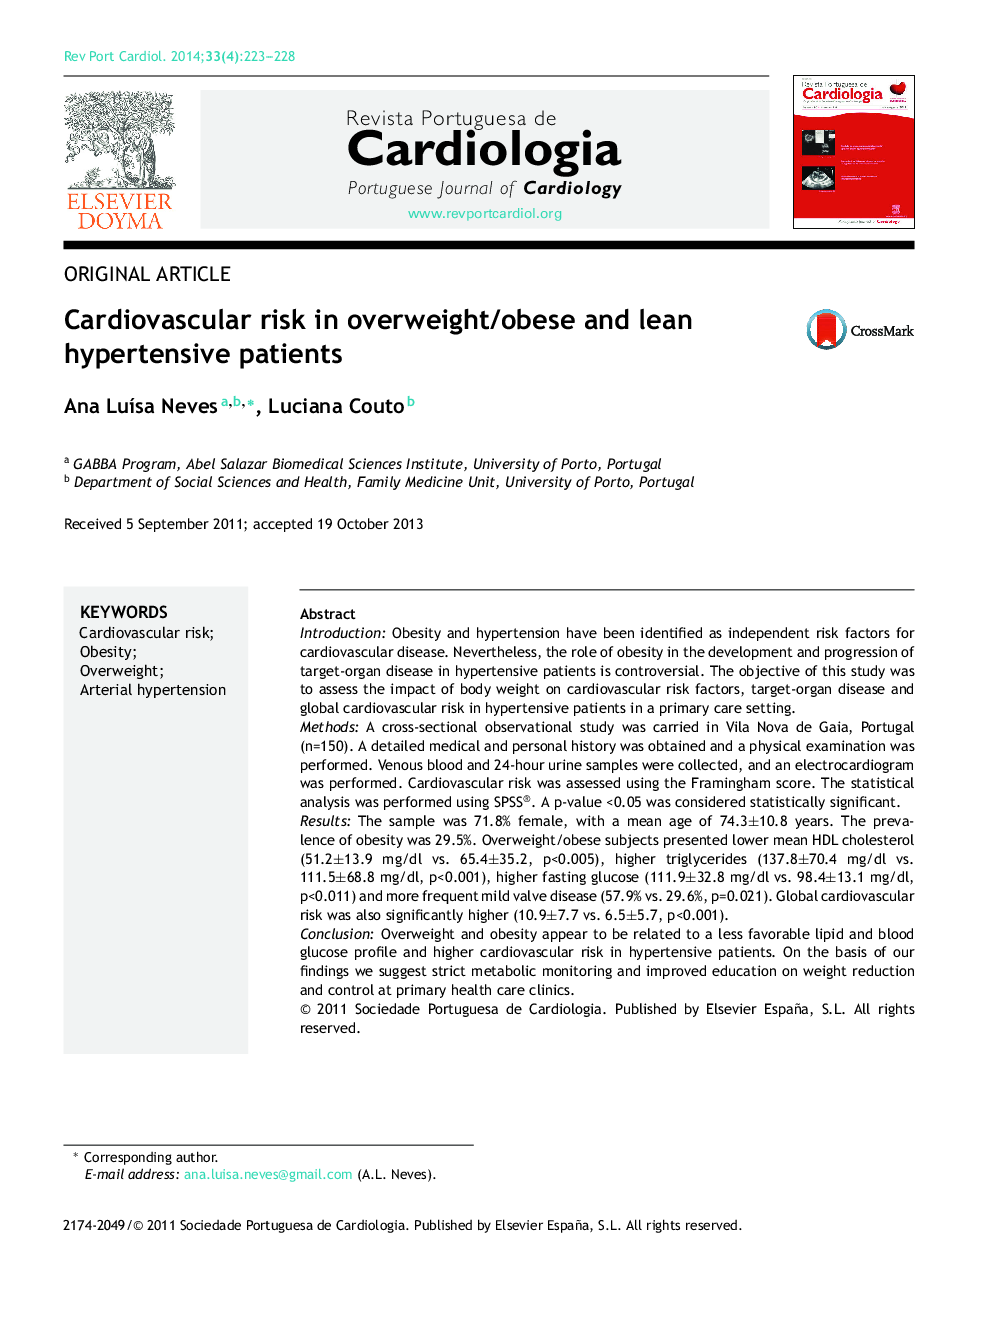 Cardiovascular risk in overweight/obese and lean hypertensive patients